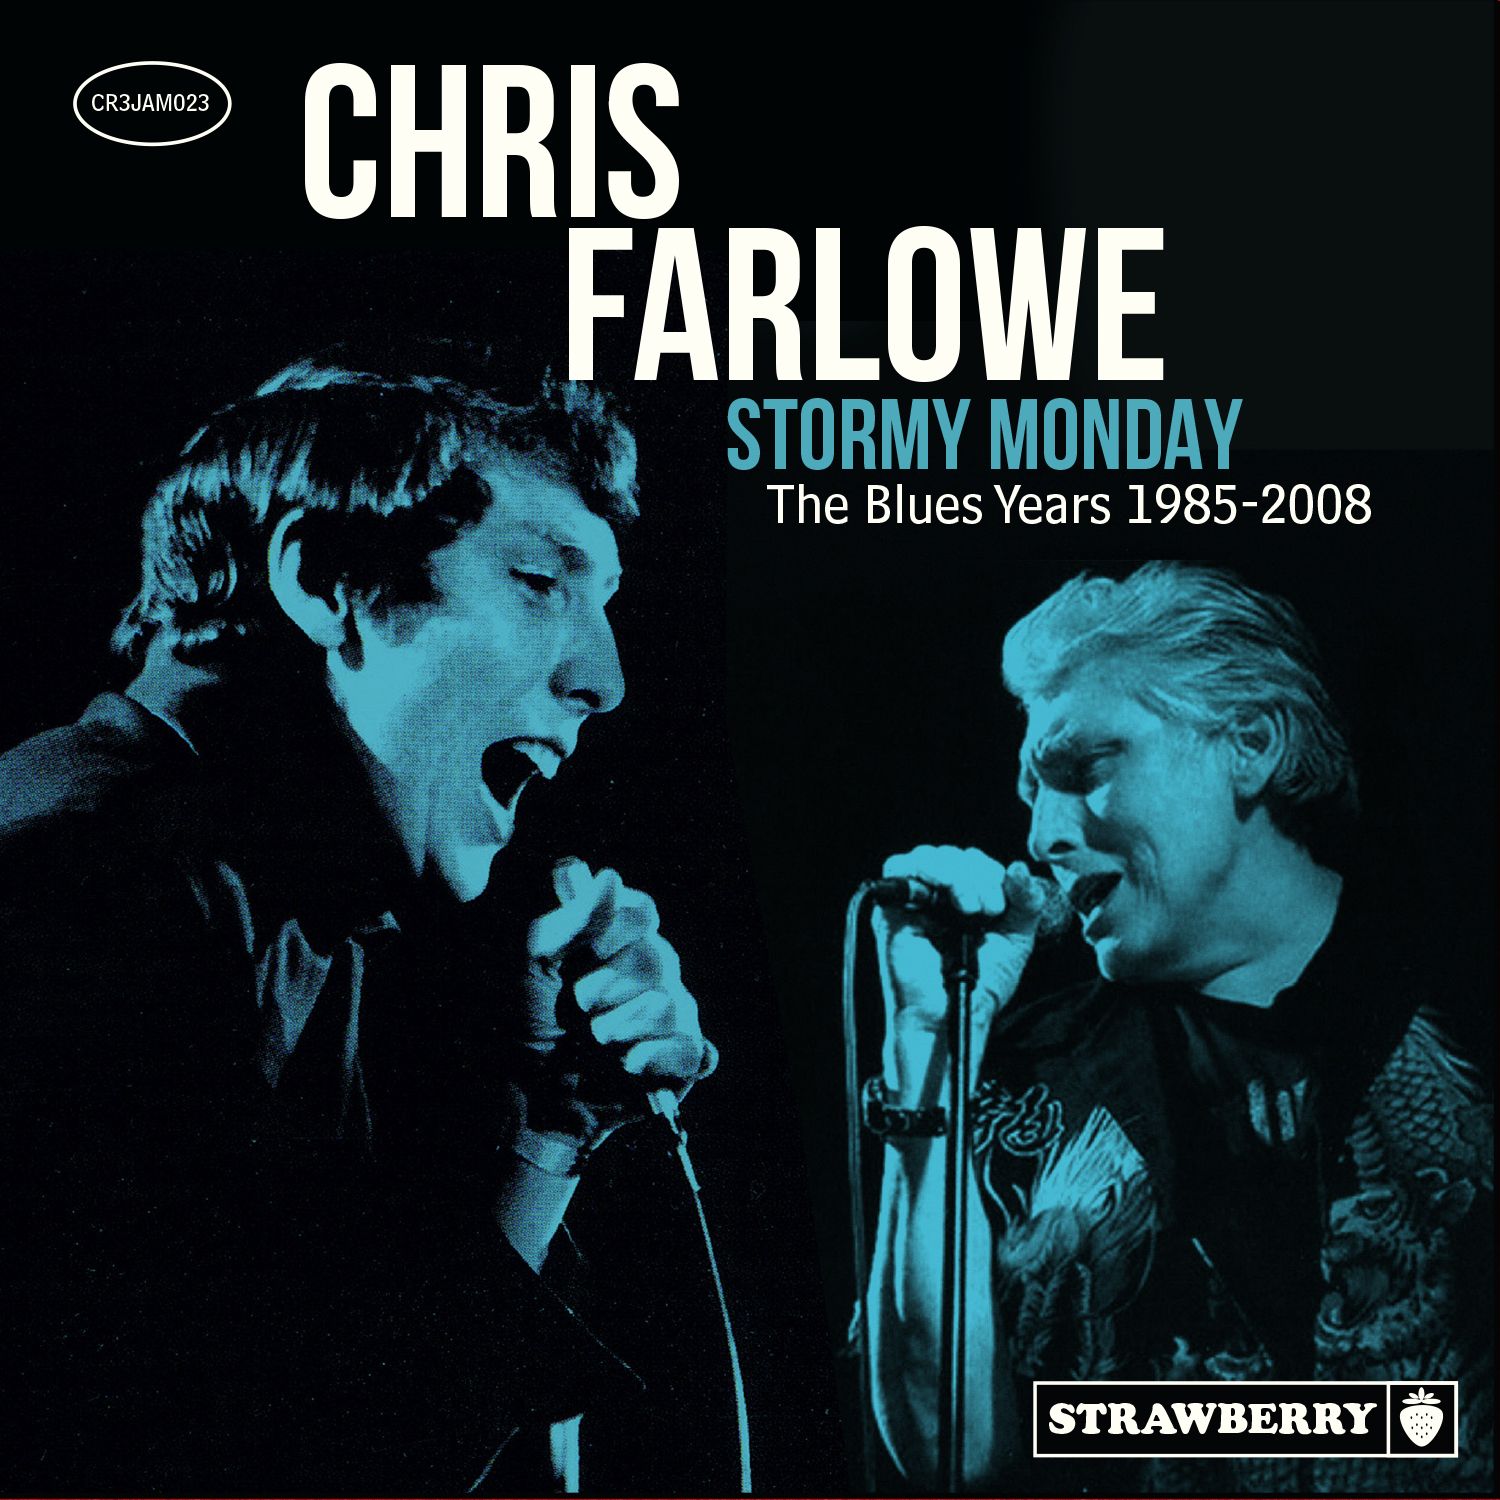 CHRIS FARLOWE / クリス・ファーロウ / STORMY MONDAY - THE BLUES YEARS 1985-2008 (3CD)